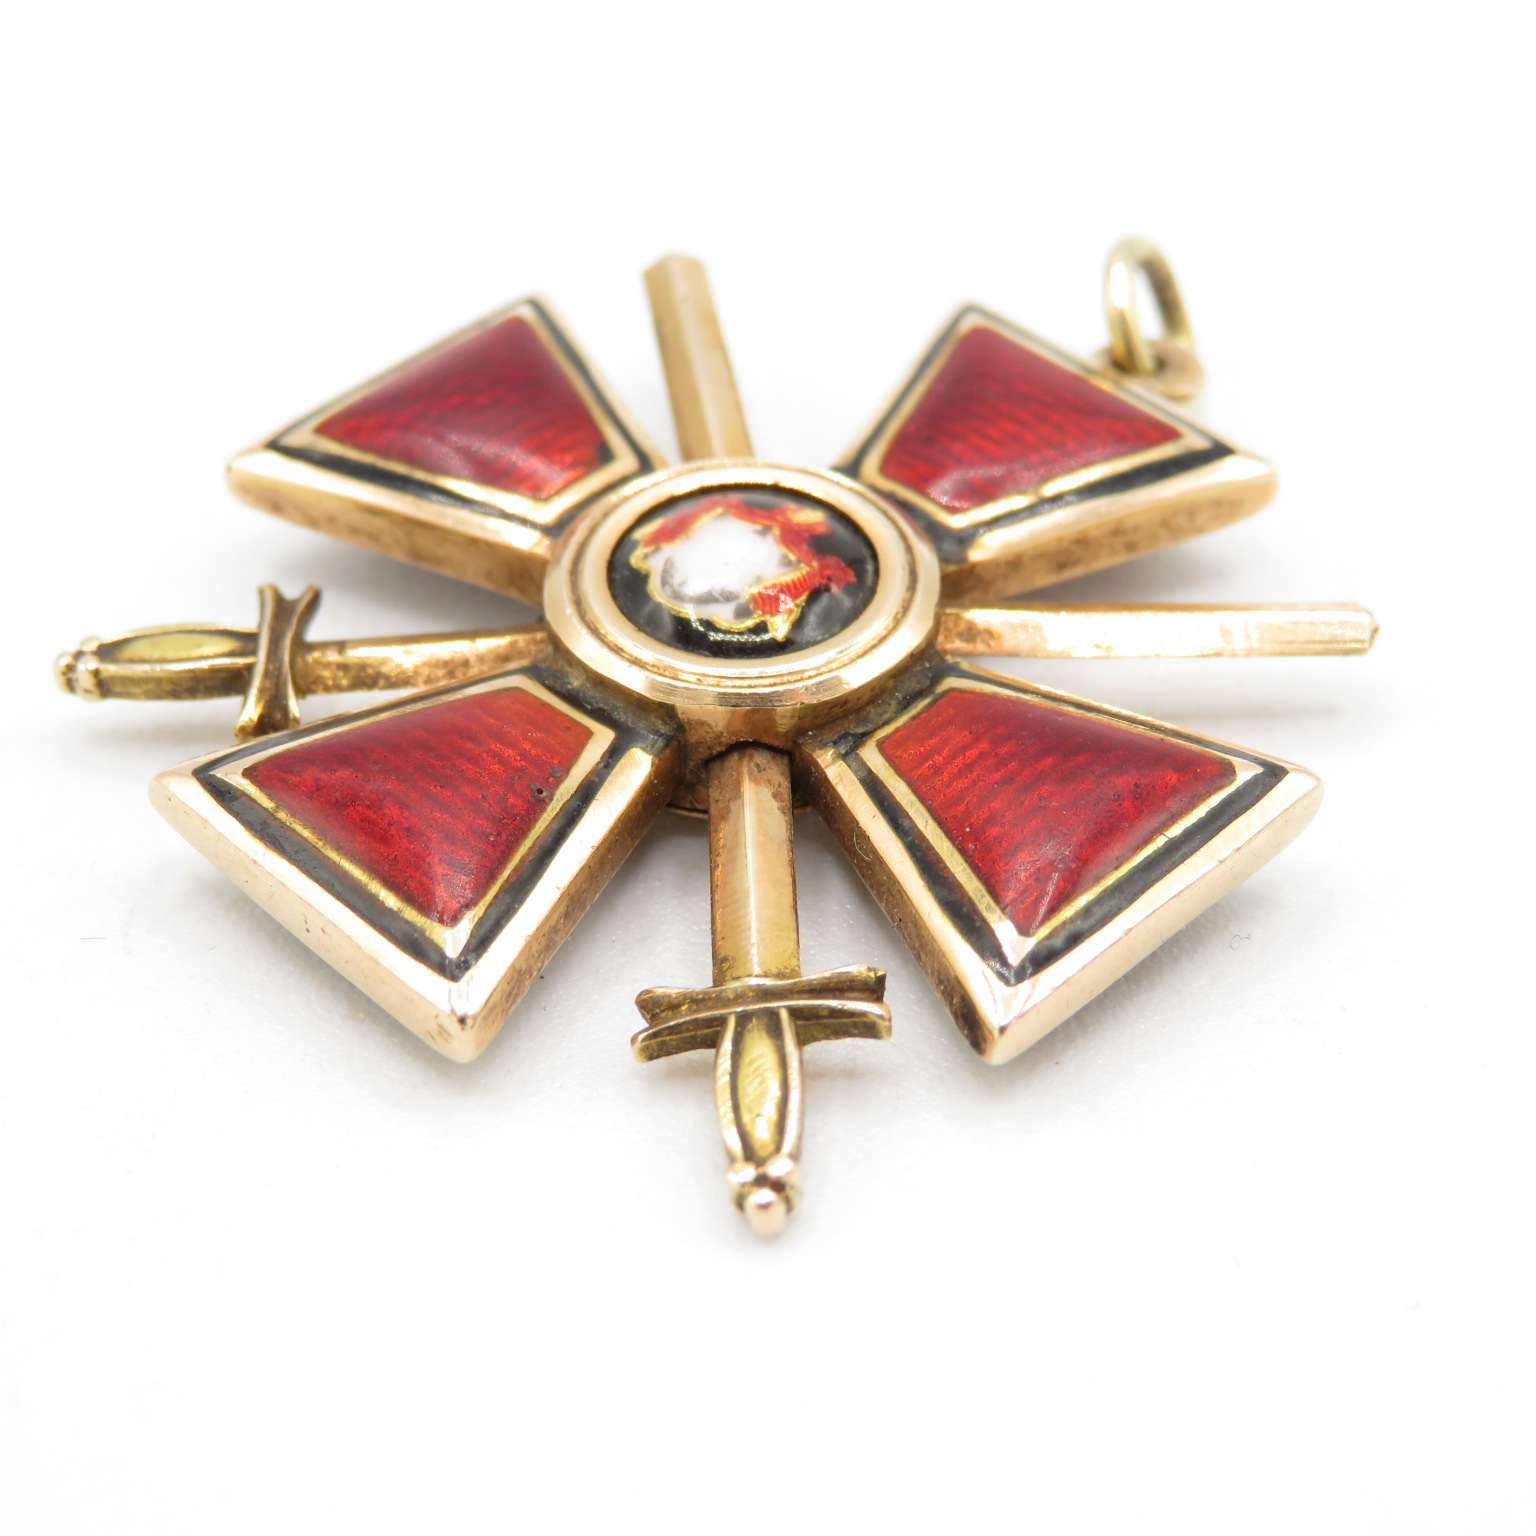 Order of St. Vladimir 18ct gold with red enamel Maltese cross with crossed swords and Royal Cipher - Image 6 of 7